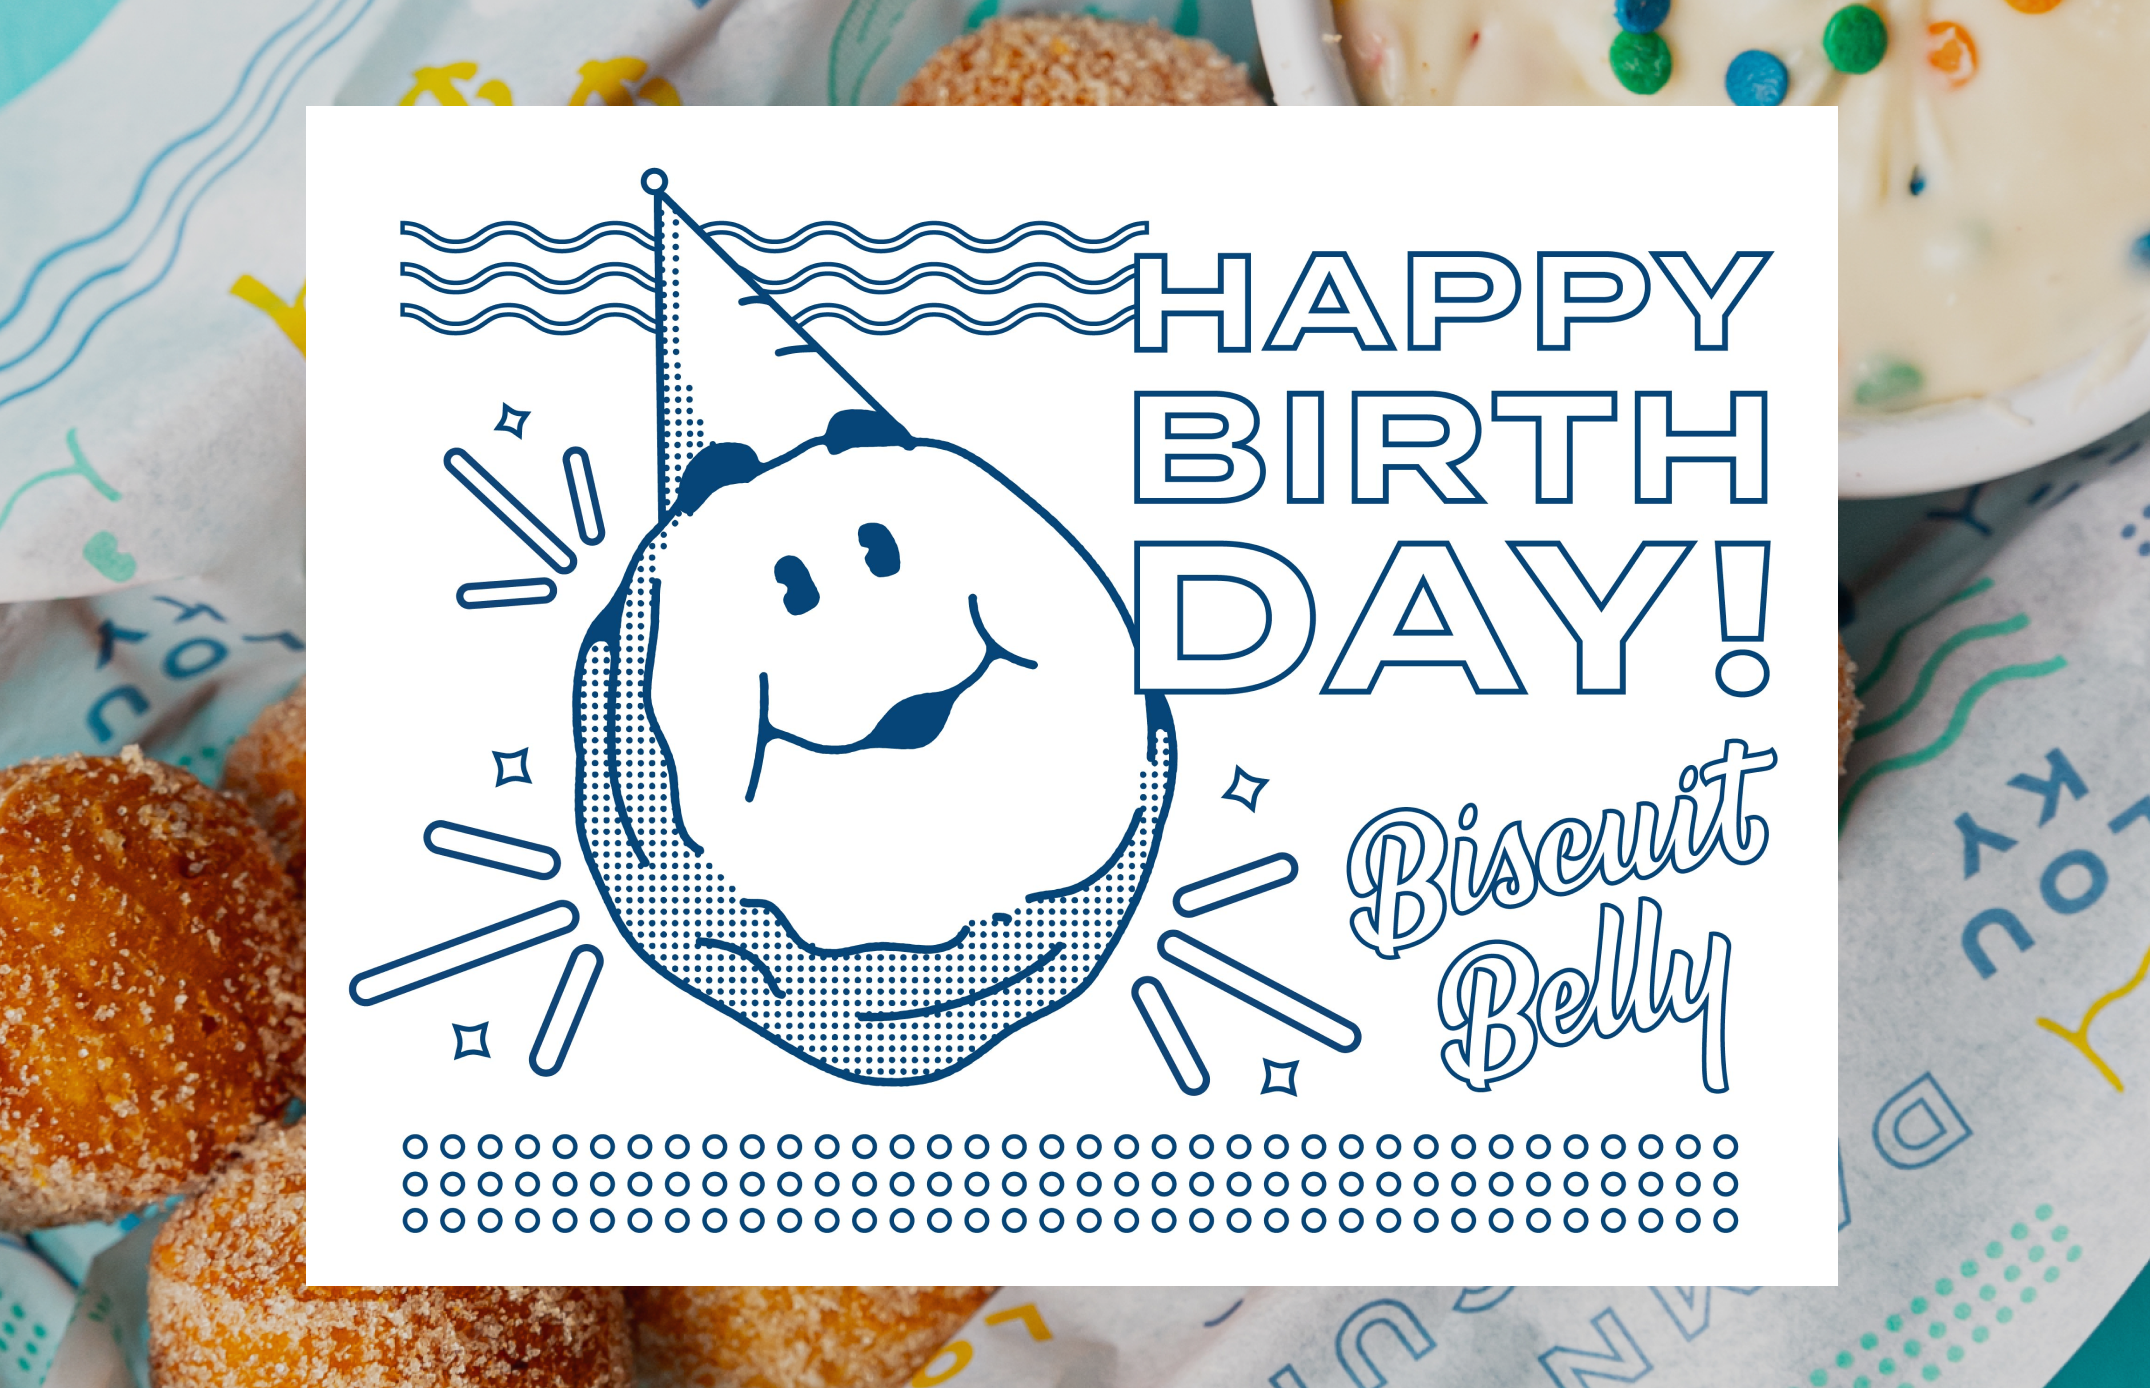 A cover of a coloring book that says "Happy birthday" with the Biscuit Belly "Biscuit Man" mascot on it.